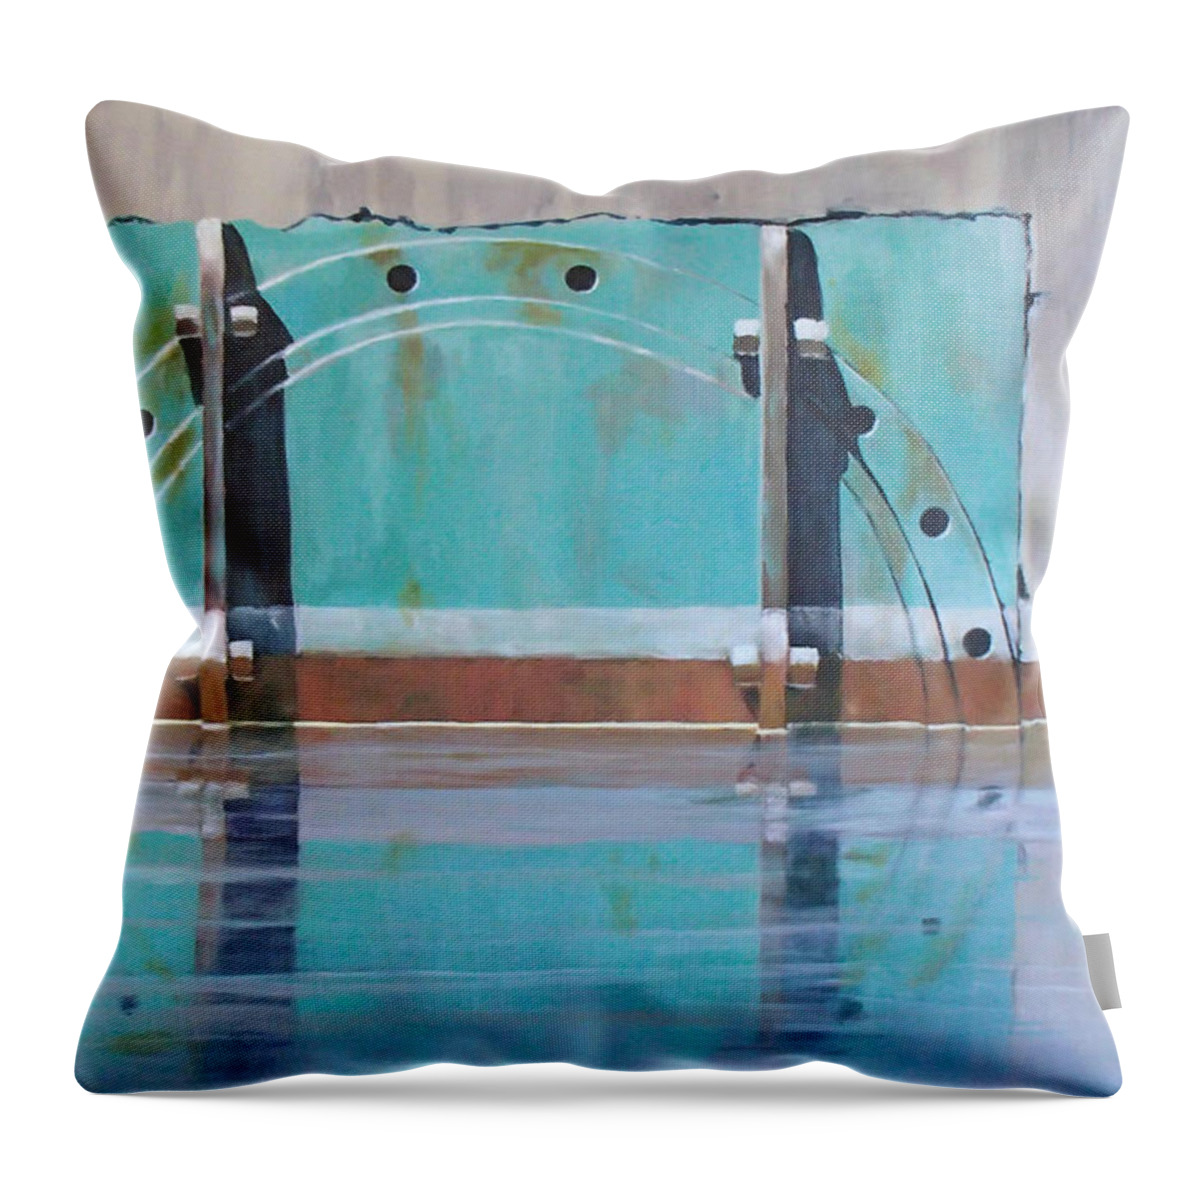 Landscape Throw Pillow featuring the painting Public Works by Philip Fleischer